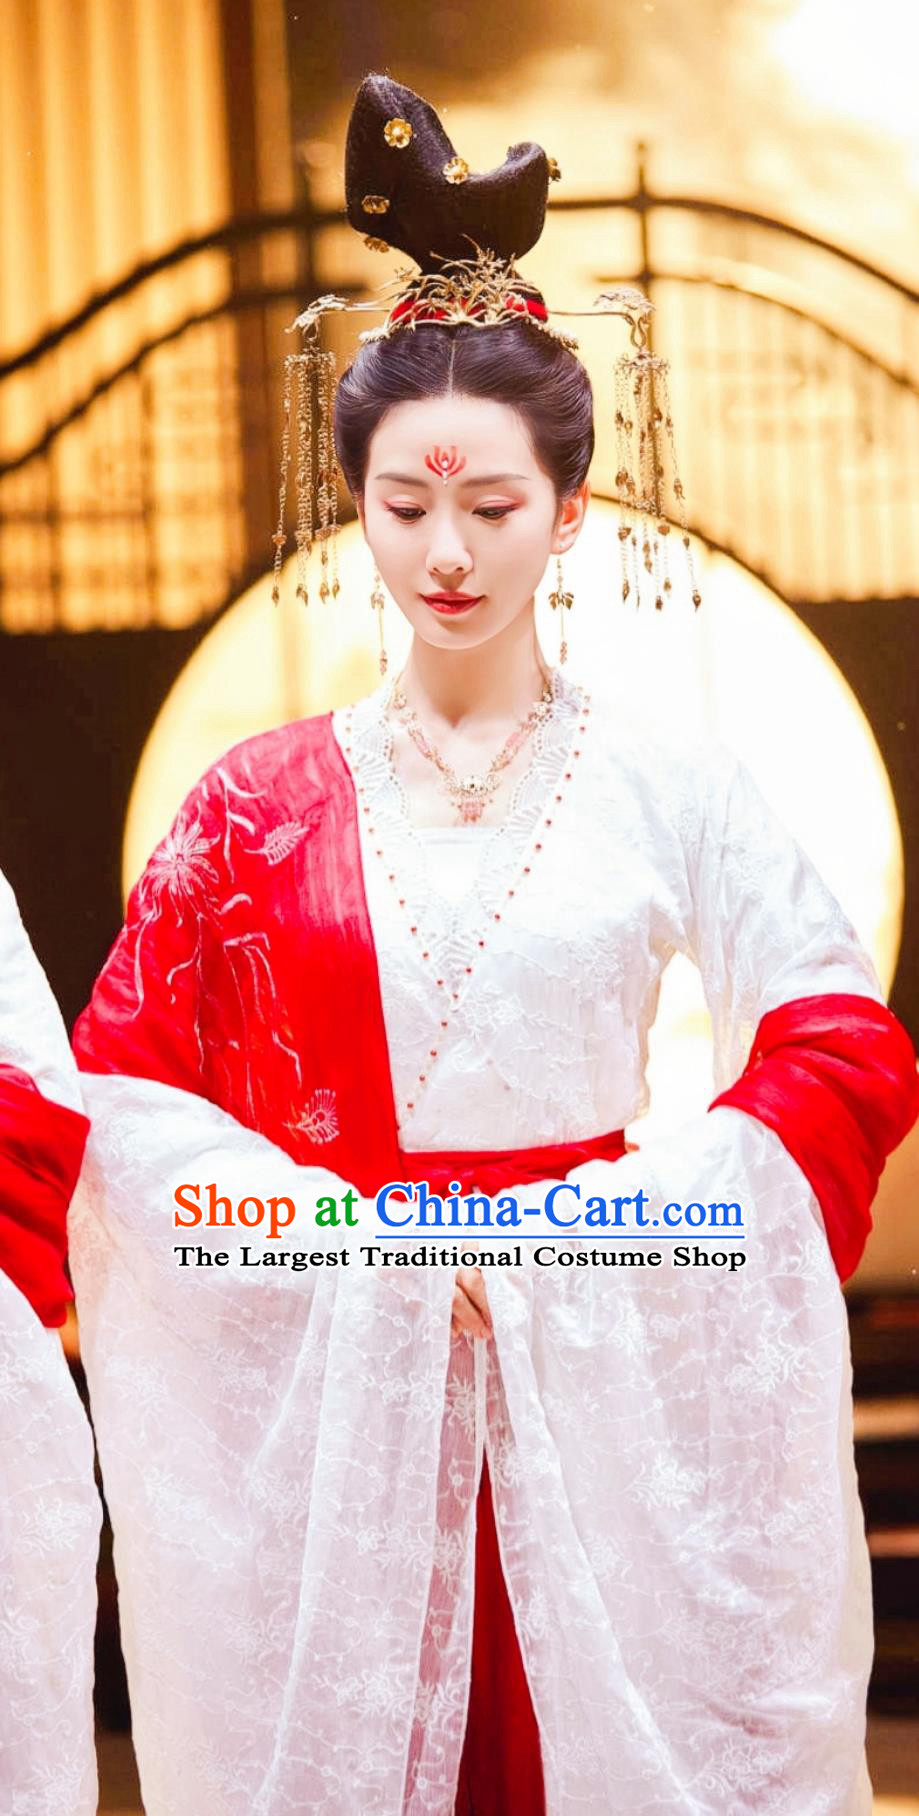 Ancient China Tang Dynasty Dance Lady Costume 2023 Wuxia TV Series A Journey To Love Ren Ru Yi White Dress